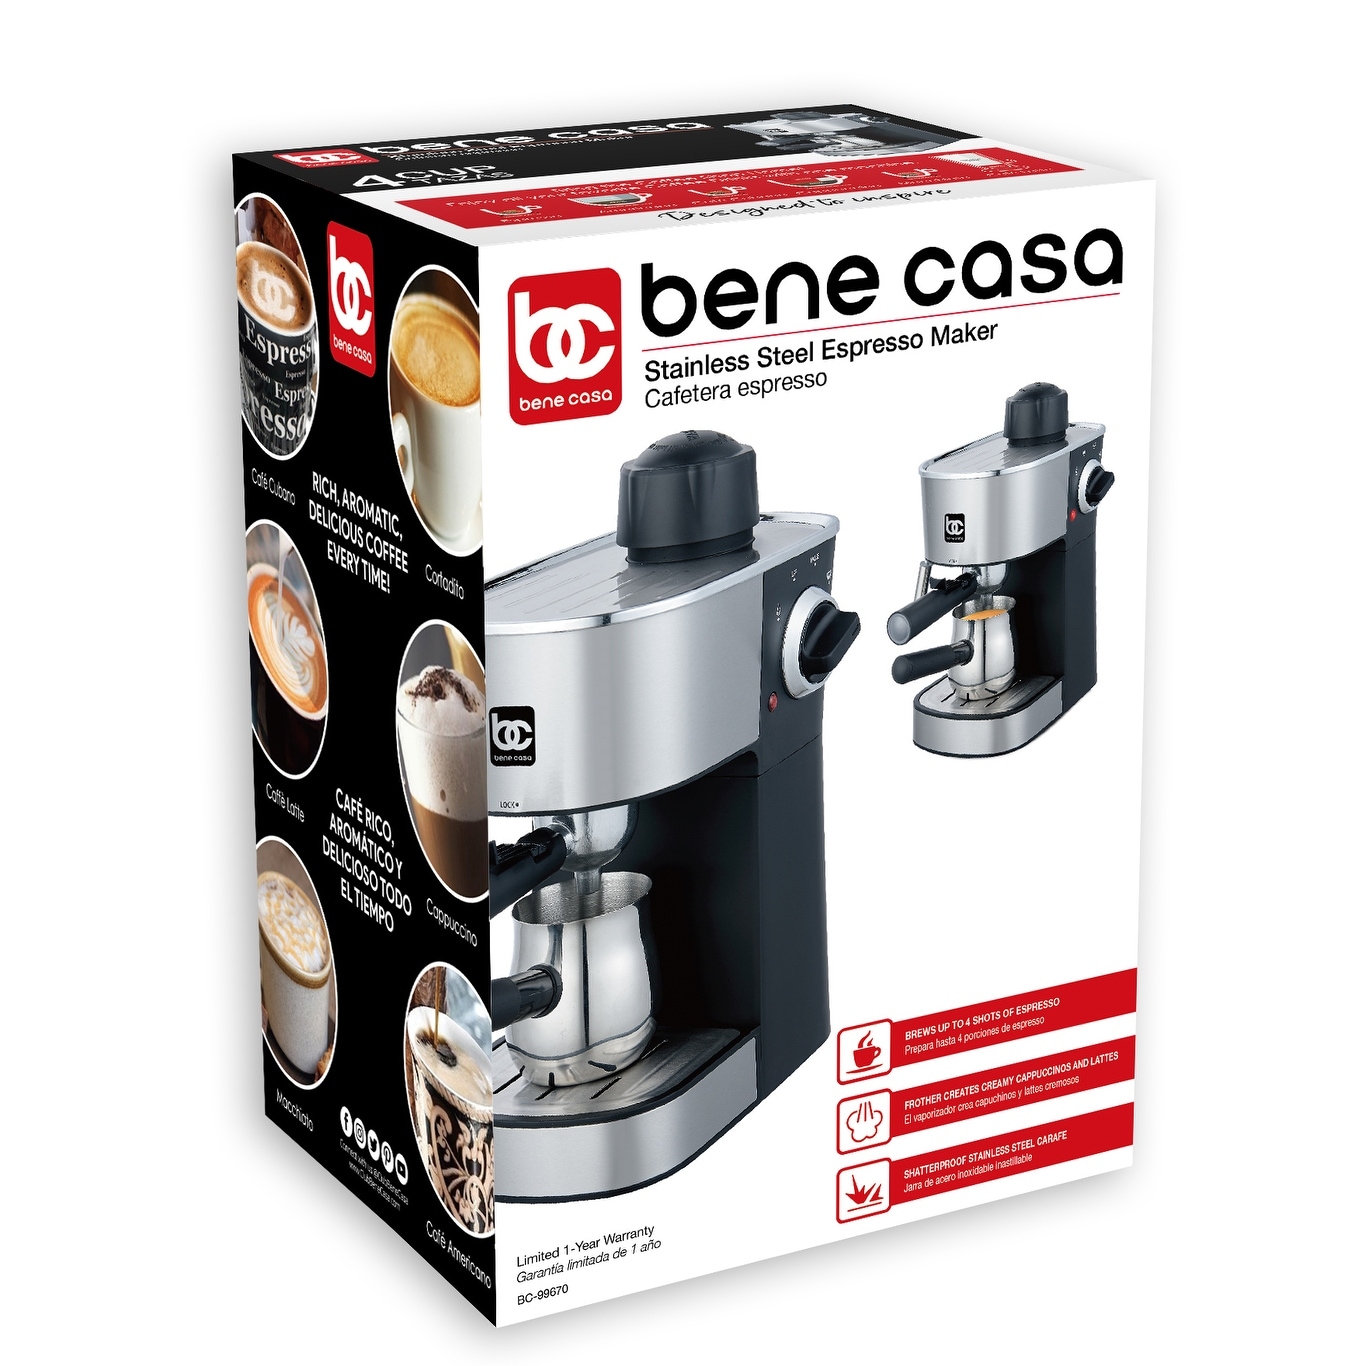 https://ak1.ostkcdn.com/images/products/is/images/direct/06d1010563befb6f1fd78b090991293ea7ebcbaf/Bene-Casa-4-cup-stainless-steel-espresso-maker-with-steam-frother-function%2C-cappuccino-maker%2C.jpg